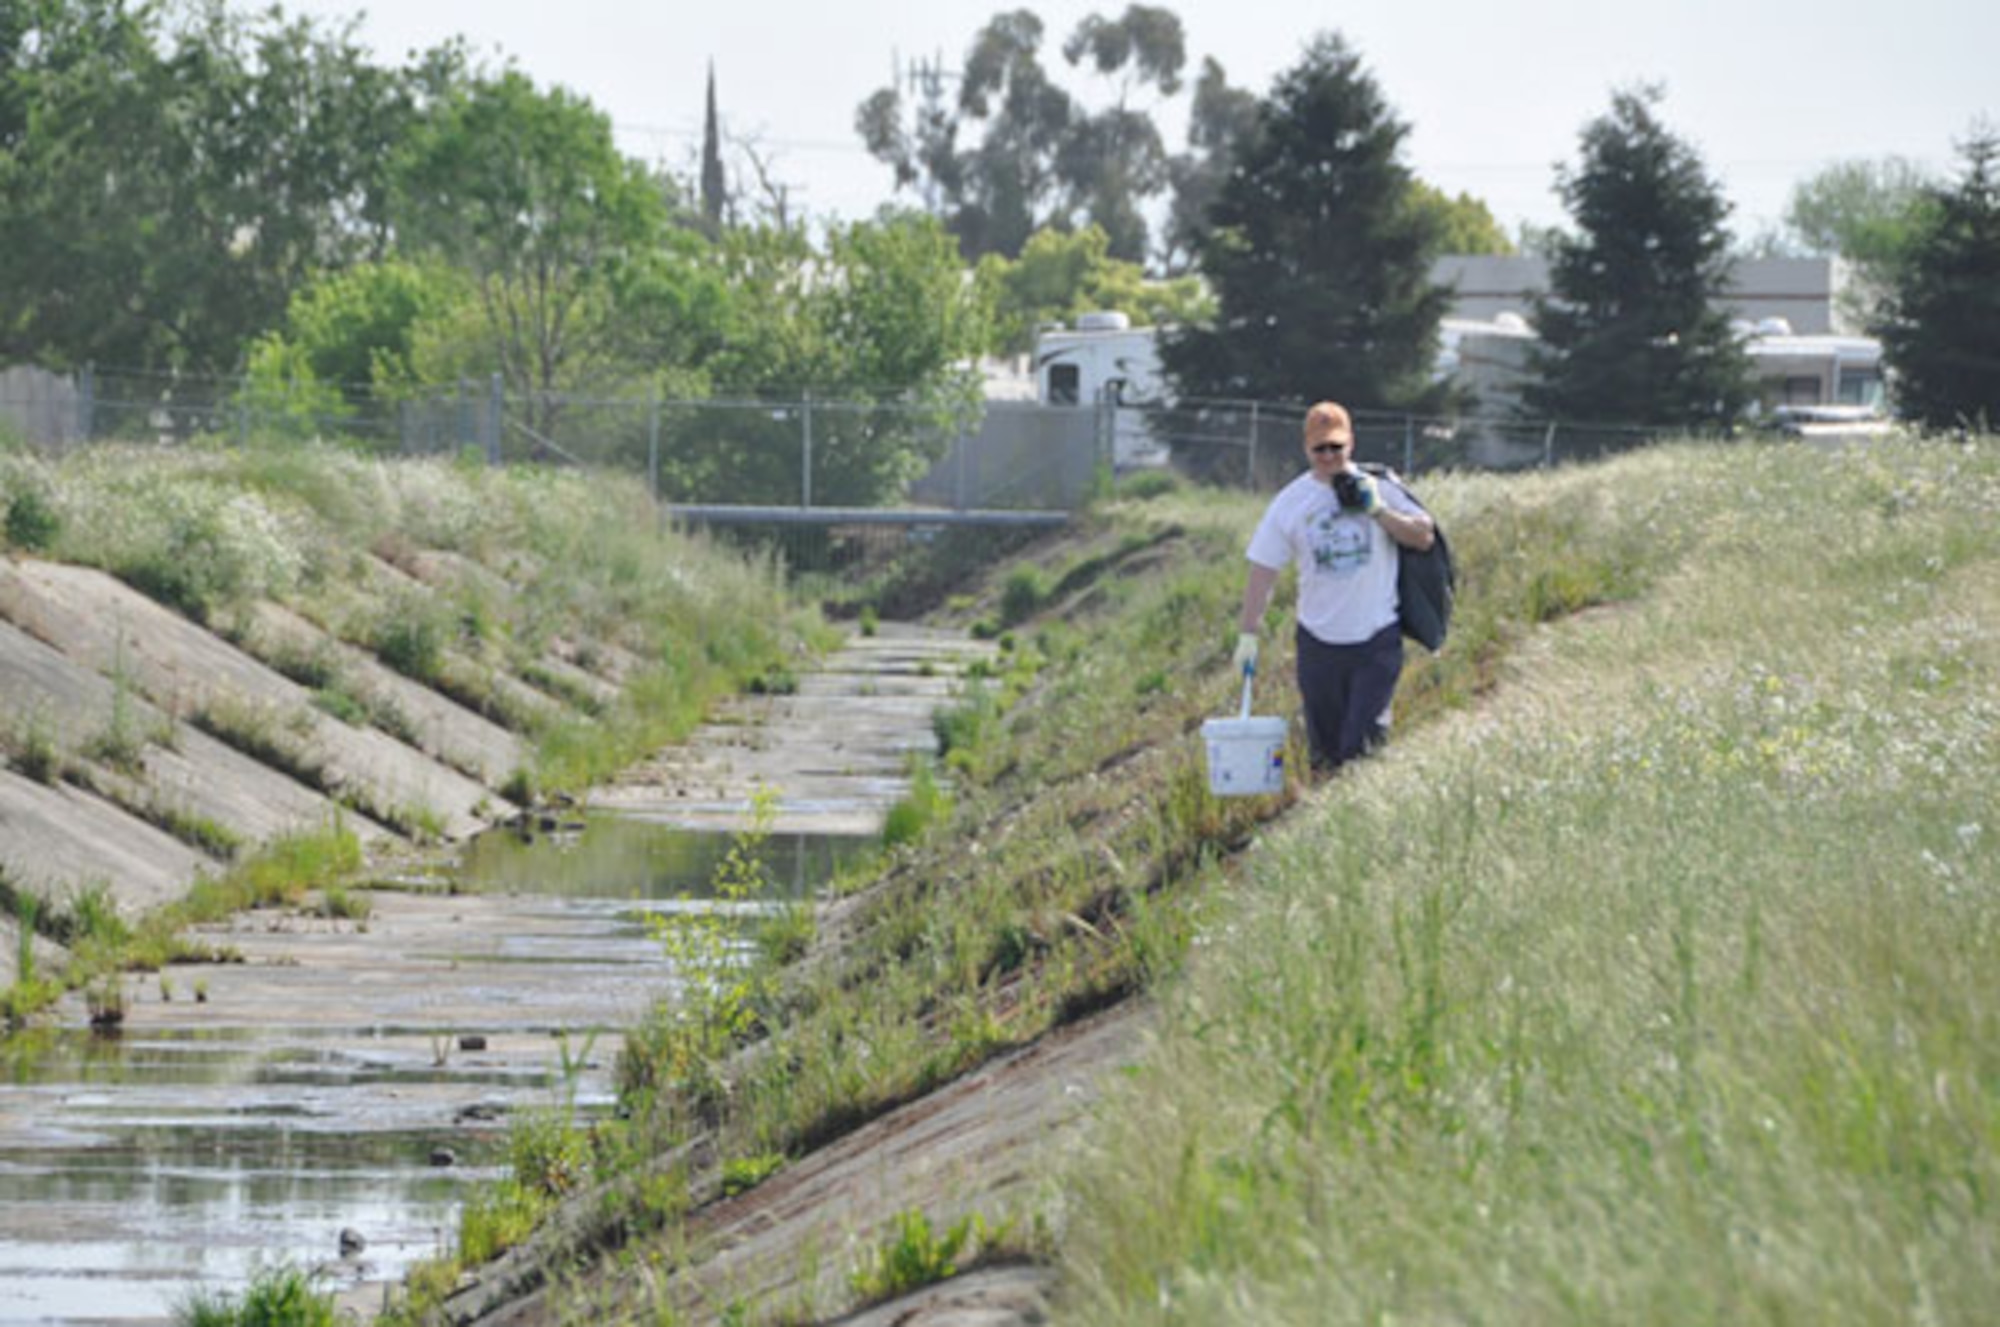 Creek Week: Volunteers pick up litter from two major creeks at the former McClellan Air Force Base as part of the greater Urban Creek Council's awareness campaign.